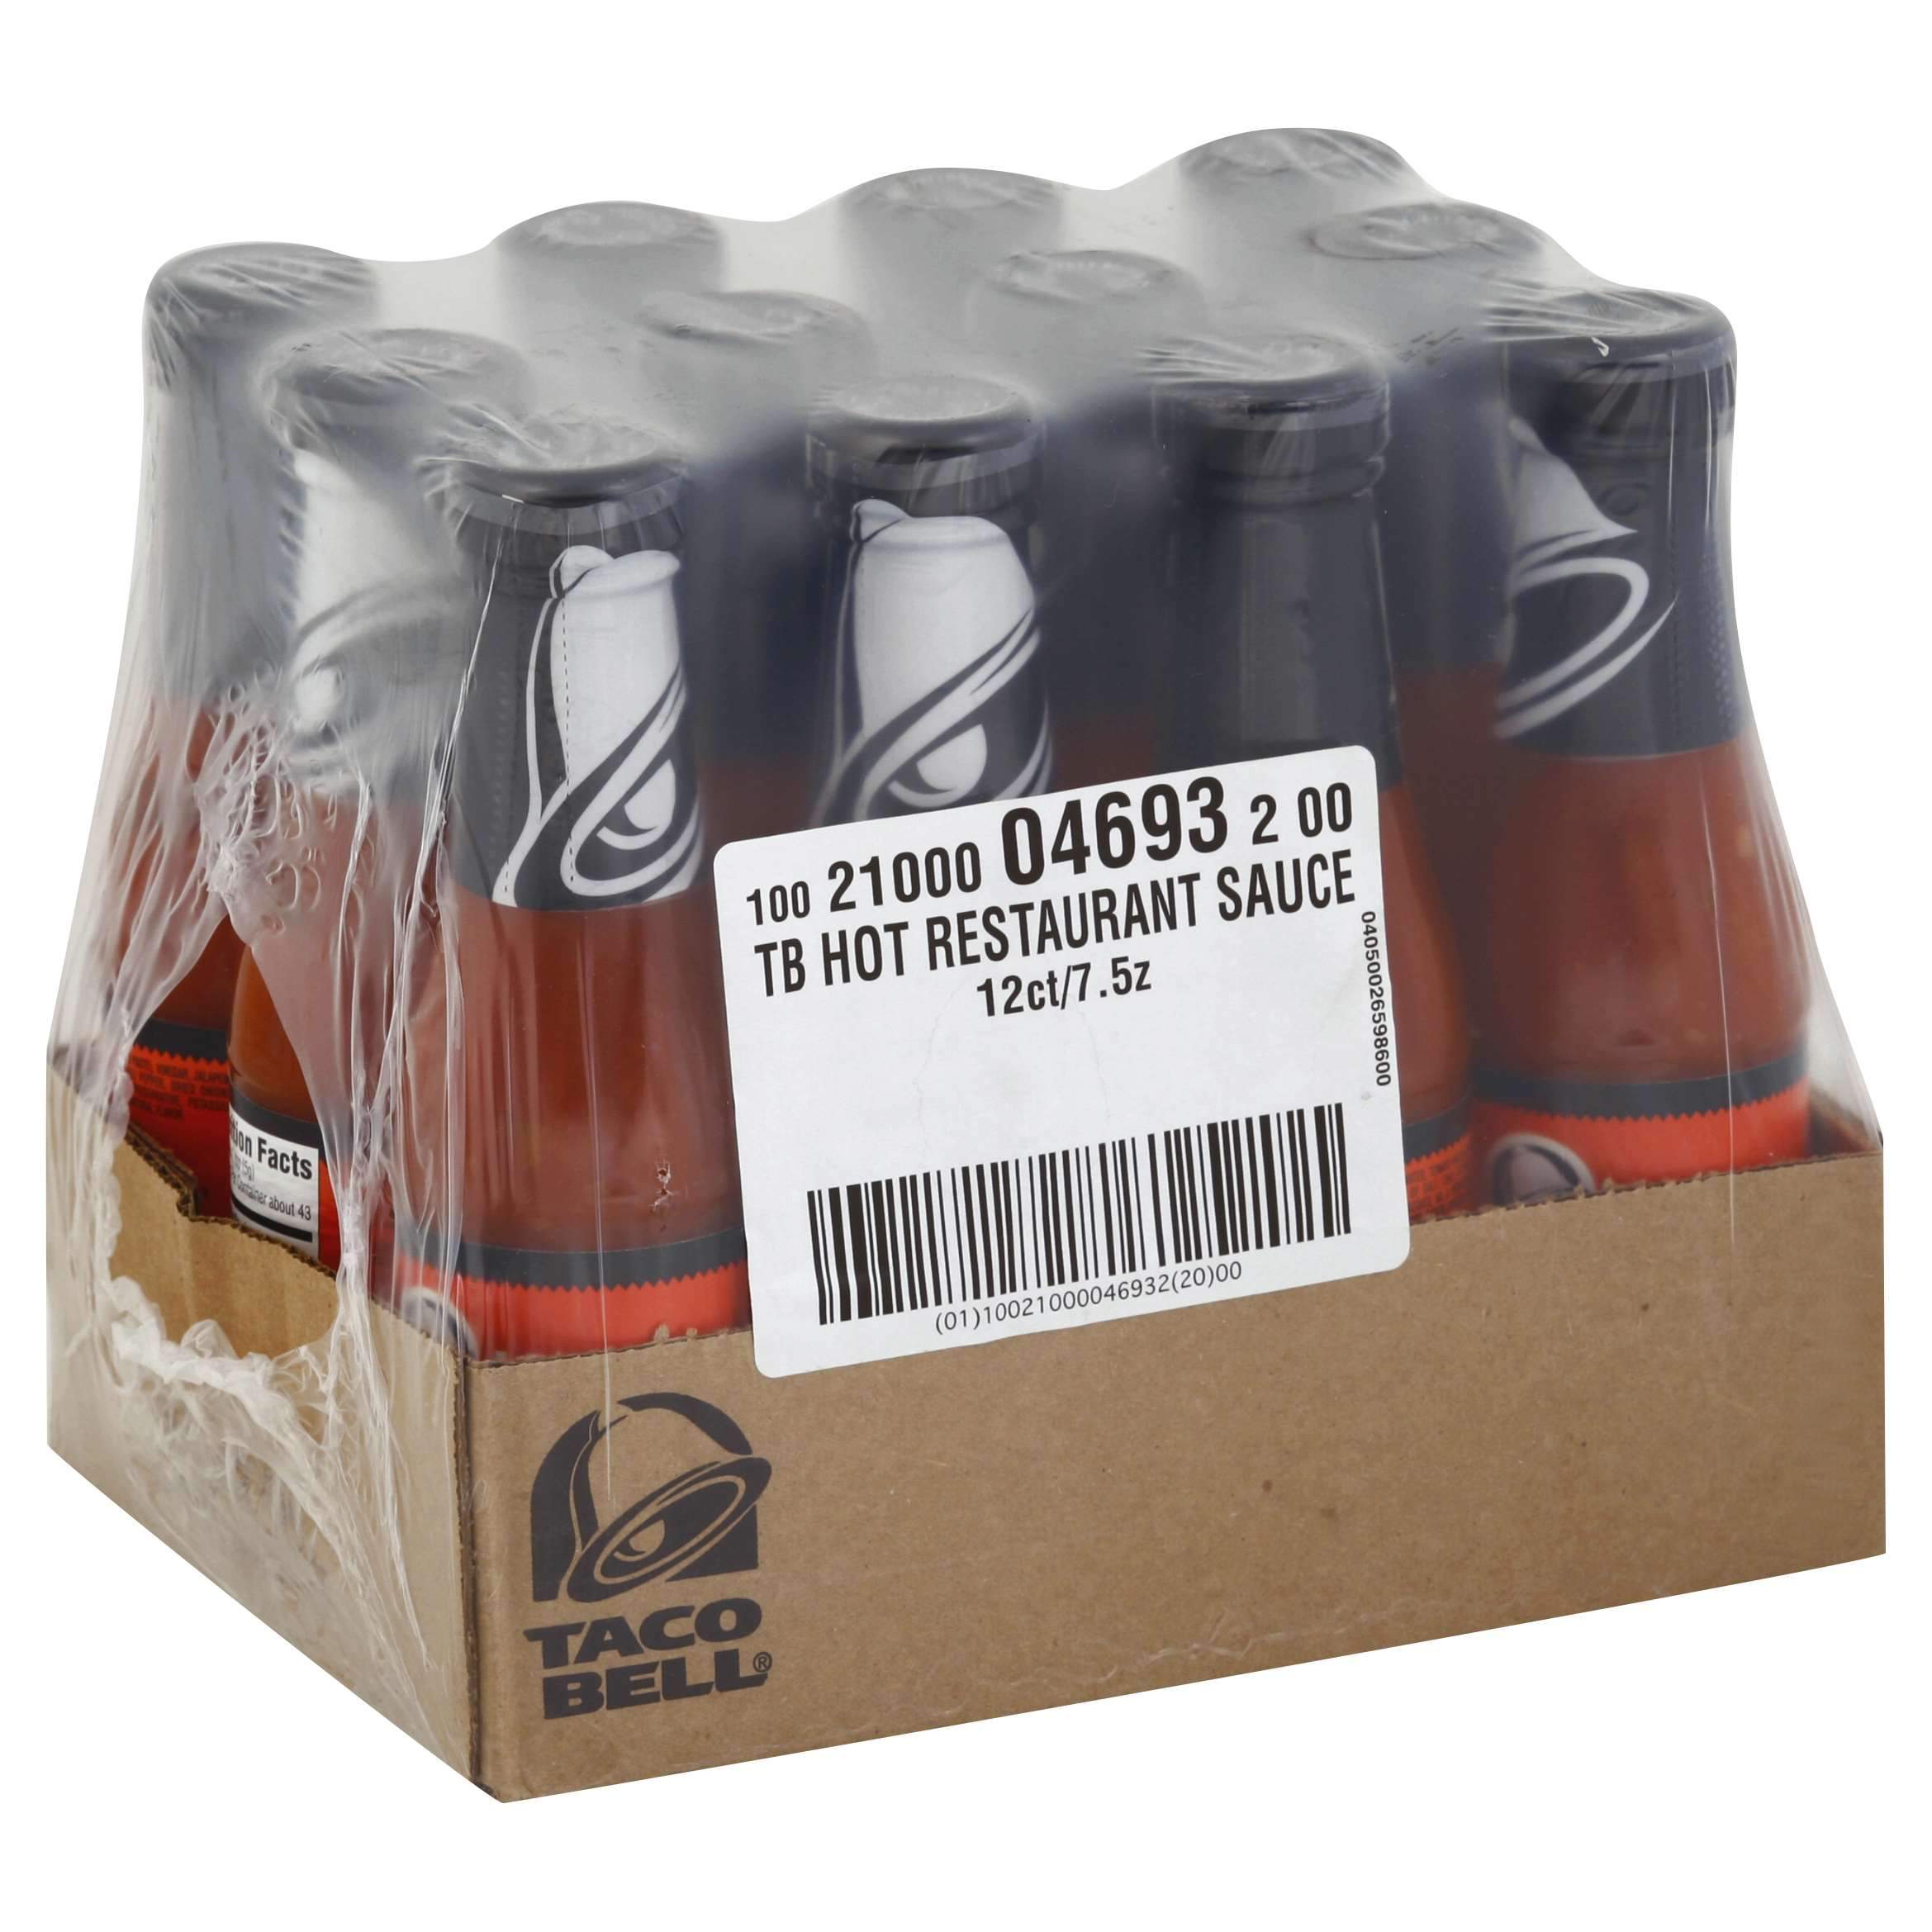 Taco Bell Sauce Taco Bell Hot Sauce 7.5 Oz-12 Count 